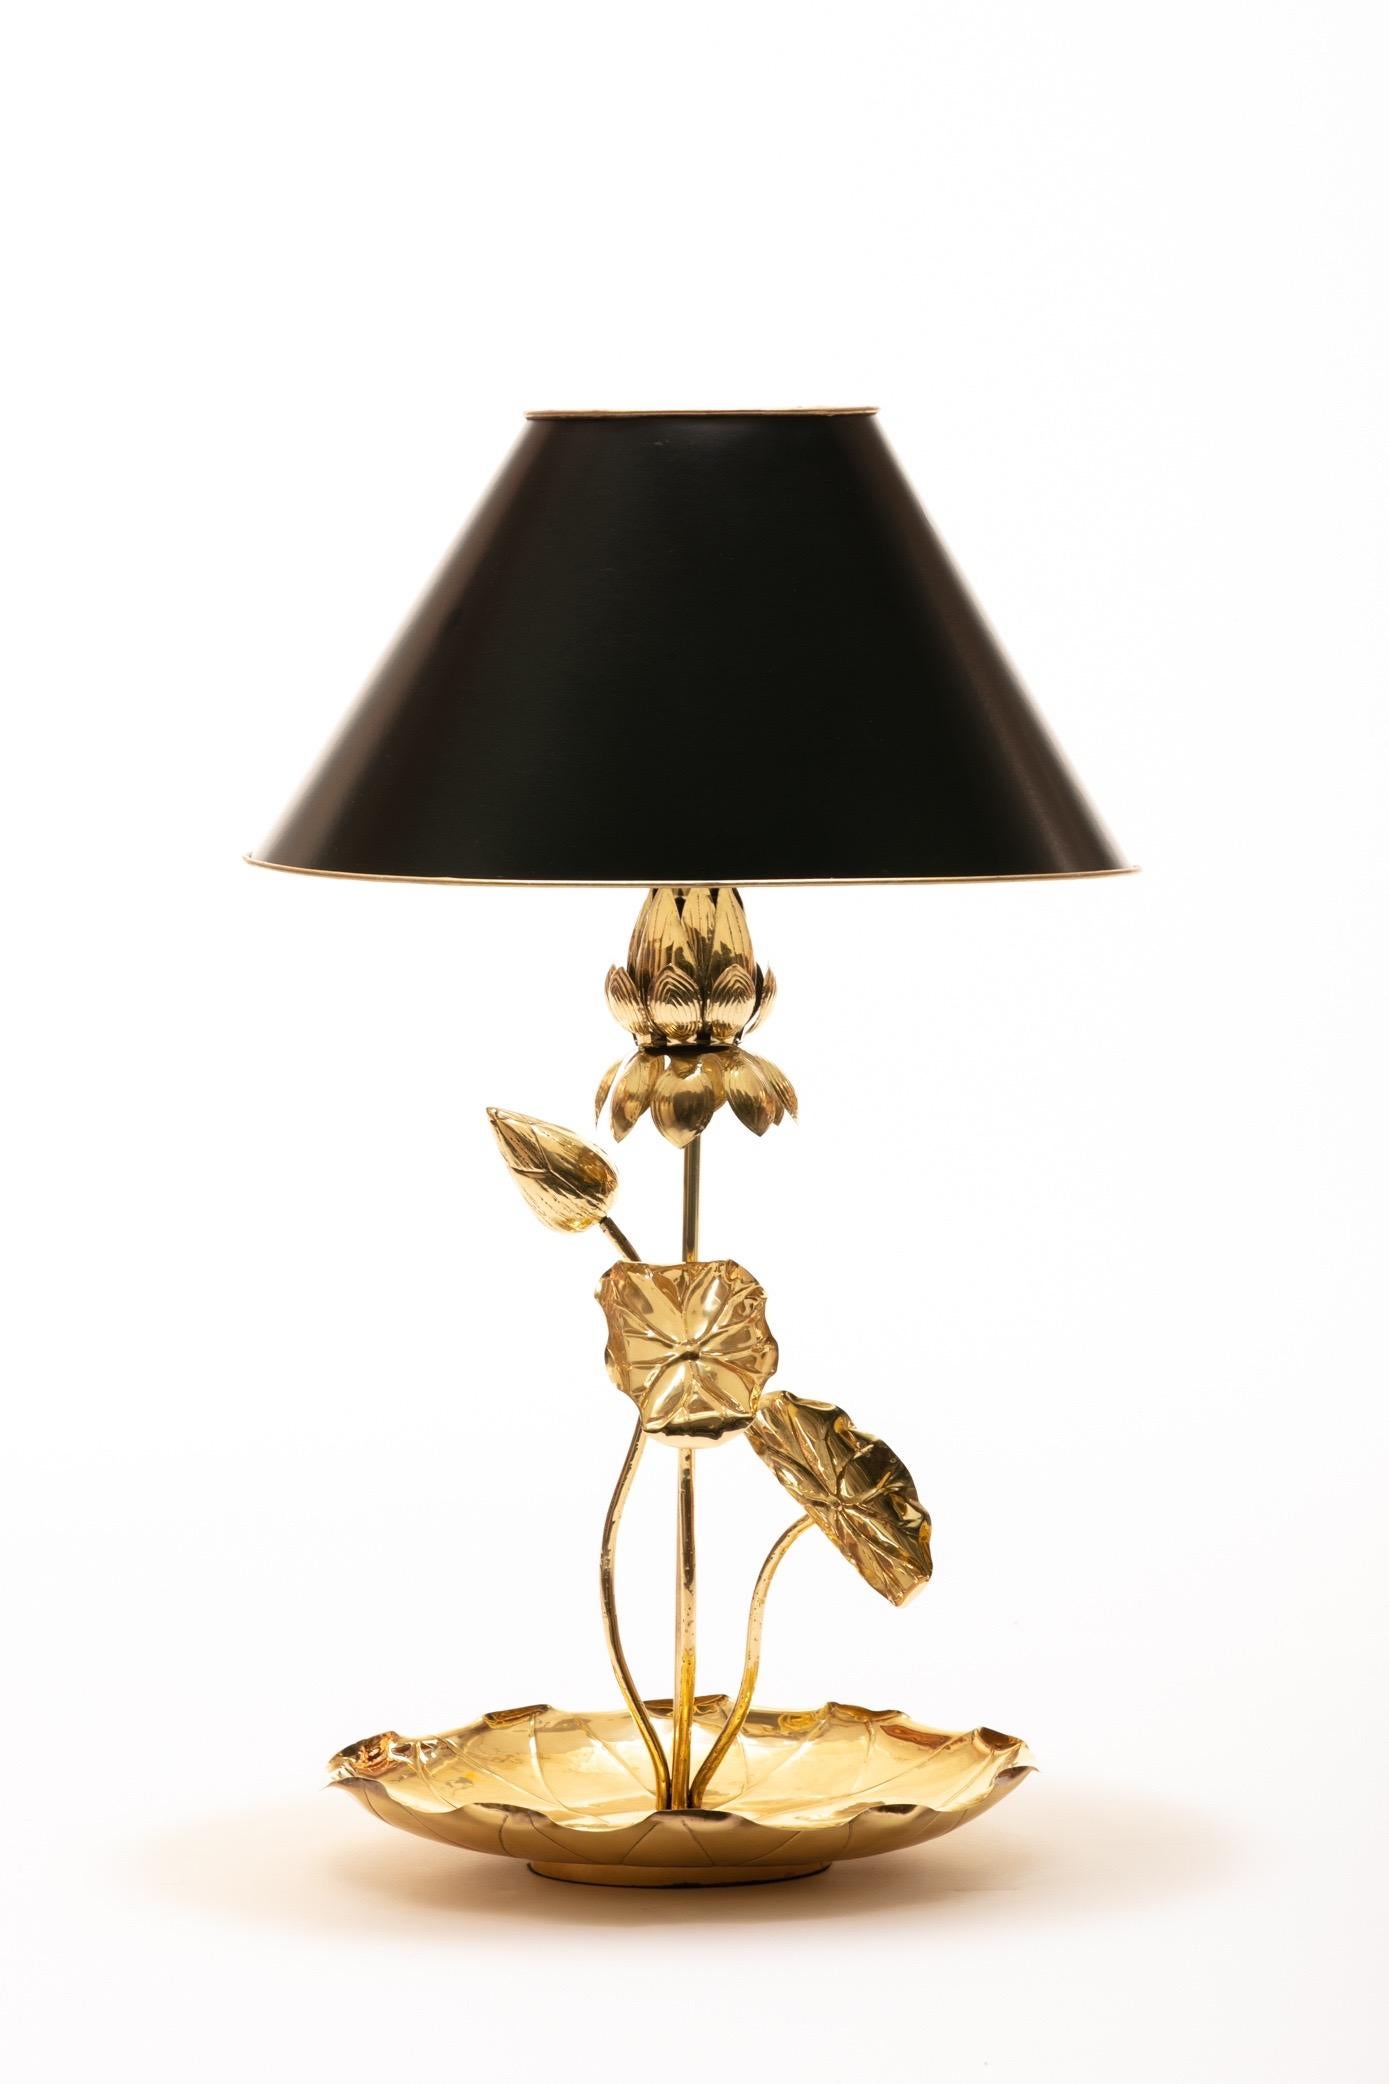 Pair of matching sculptural brass flower lamps by Feldman Lighting Company often described as in the style of Tommi Parzinger. When originally sold, Feldman lotus lamps were customized to the buyer's taste - one could select the number of branches